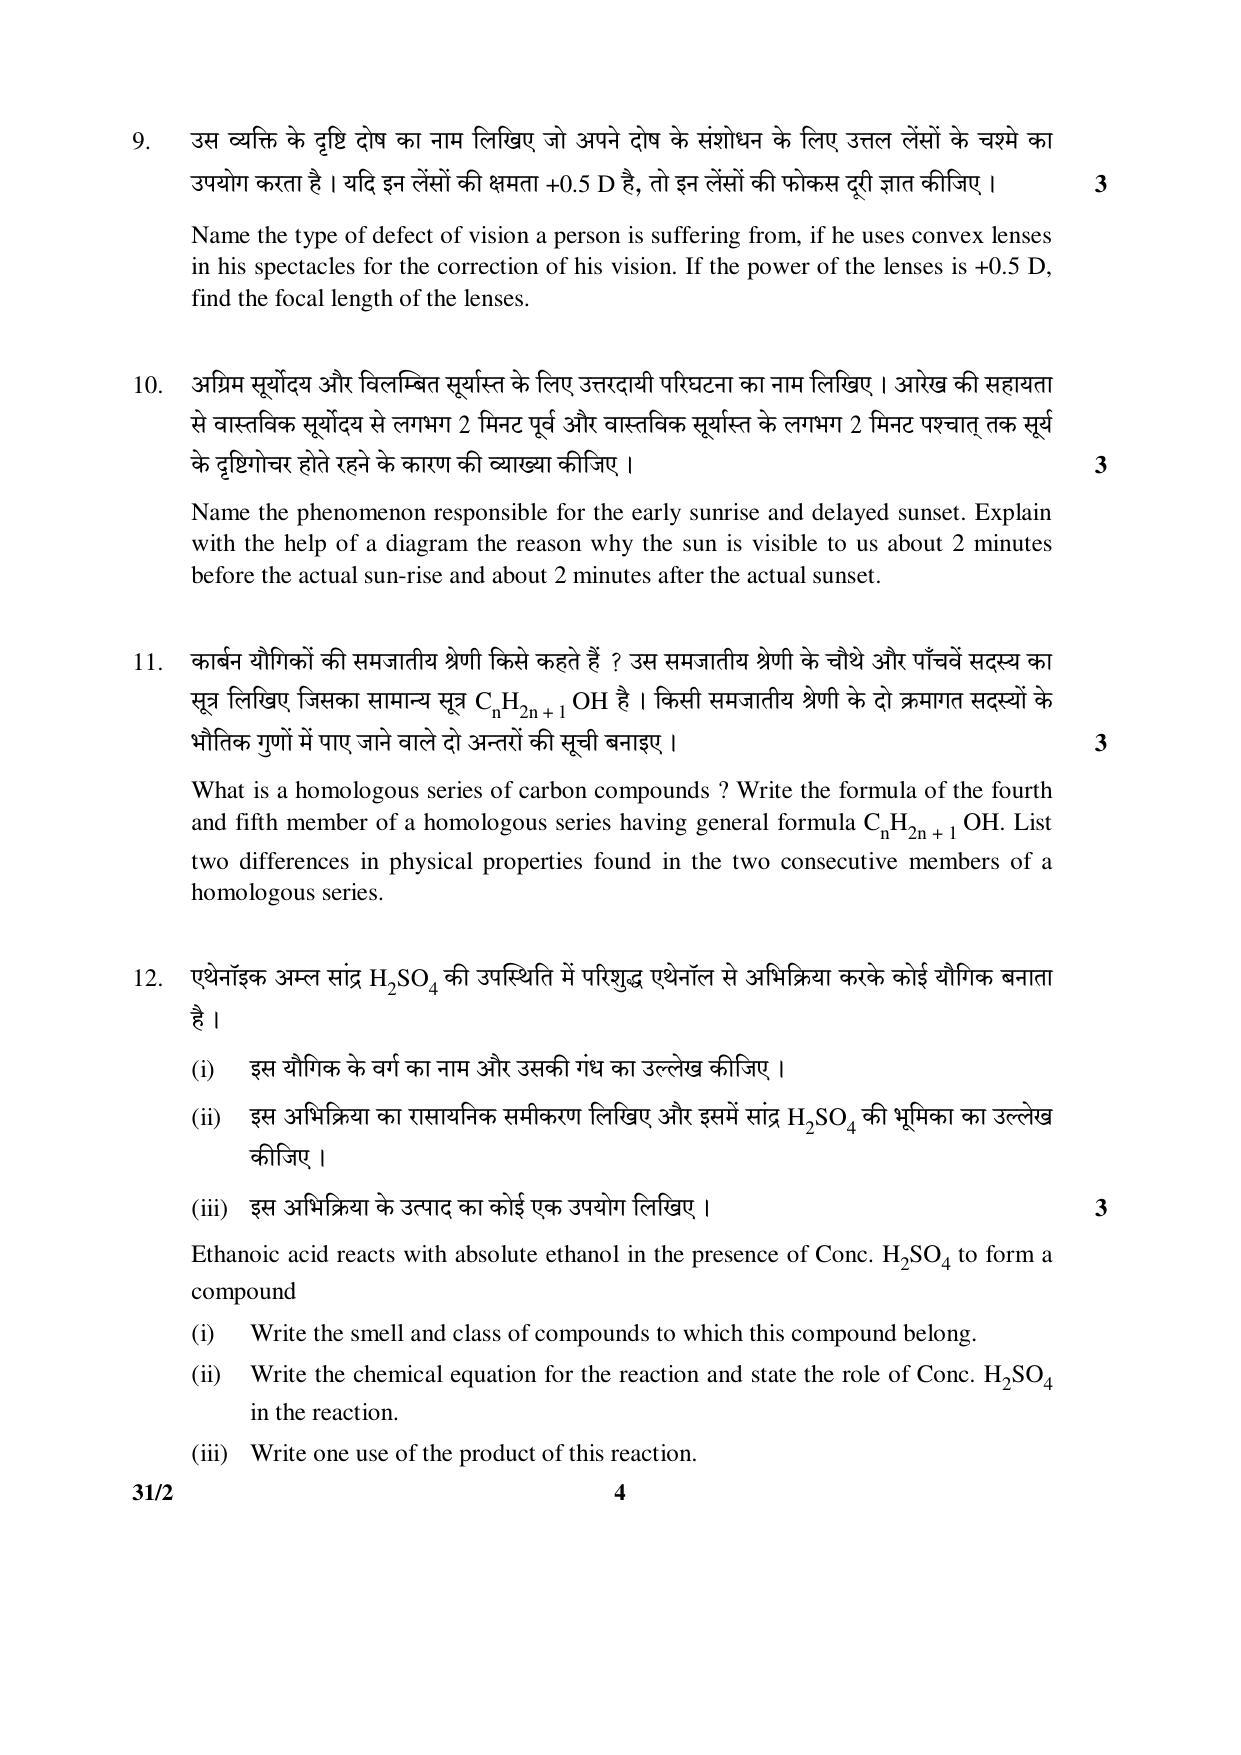 CBSE Class 10 31-2 (Science) 2017-comptt Question Paper - Page 4